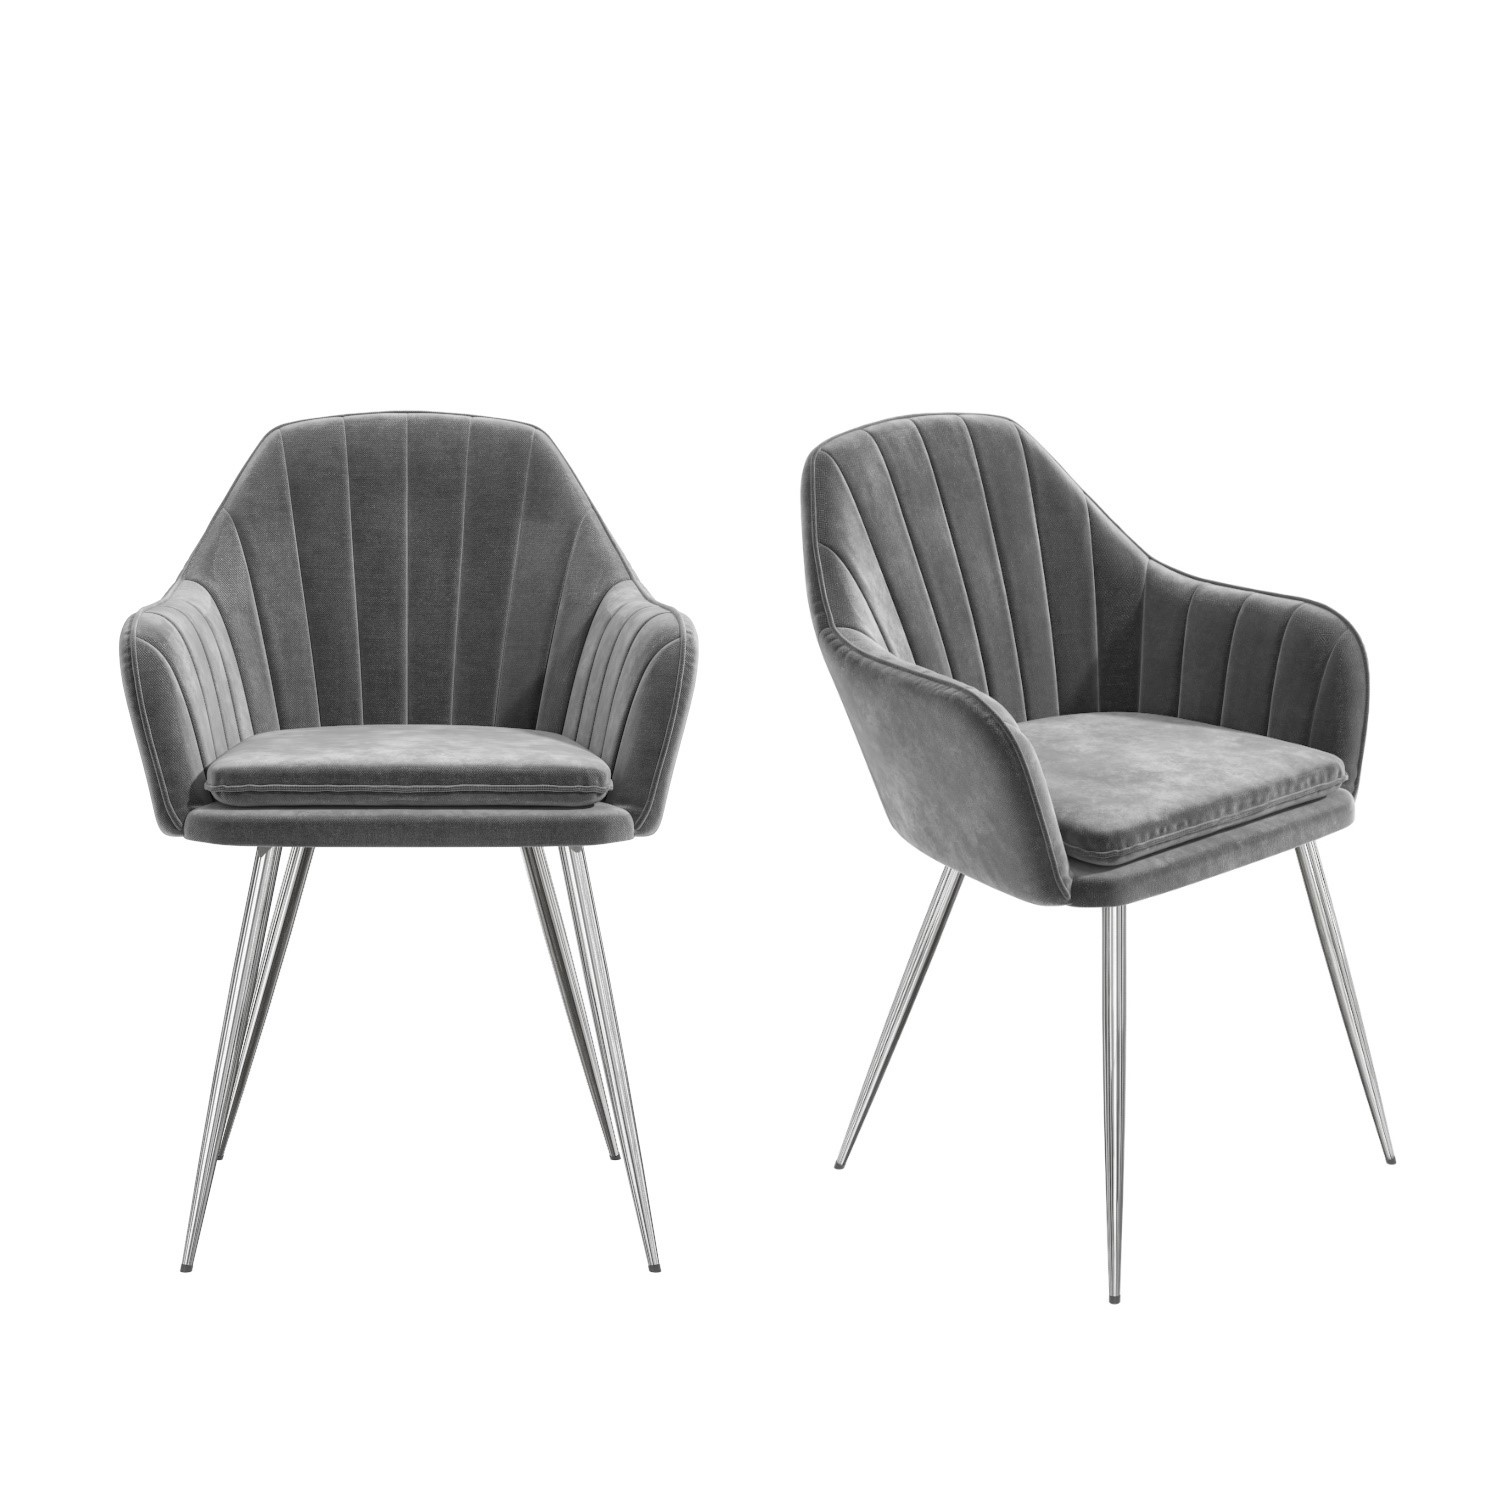 Set Of 2 Grey Velvet Dining Tub Chairs, Grey Real Leather Dining Room Chairs With Chrome Legs